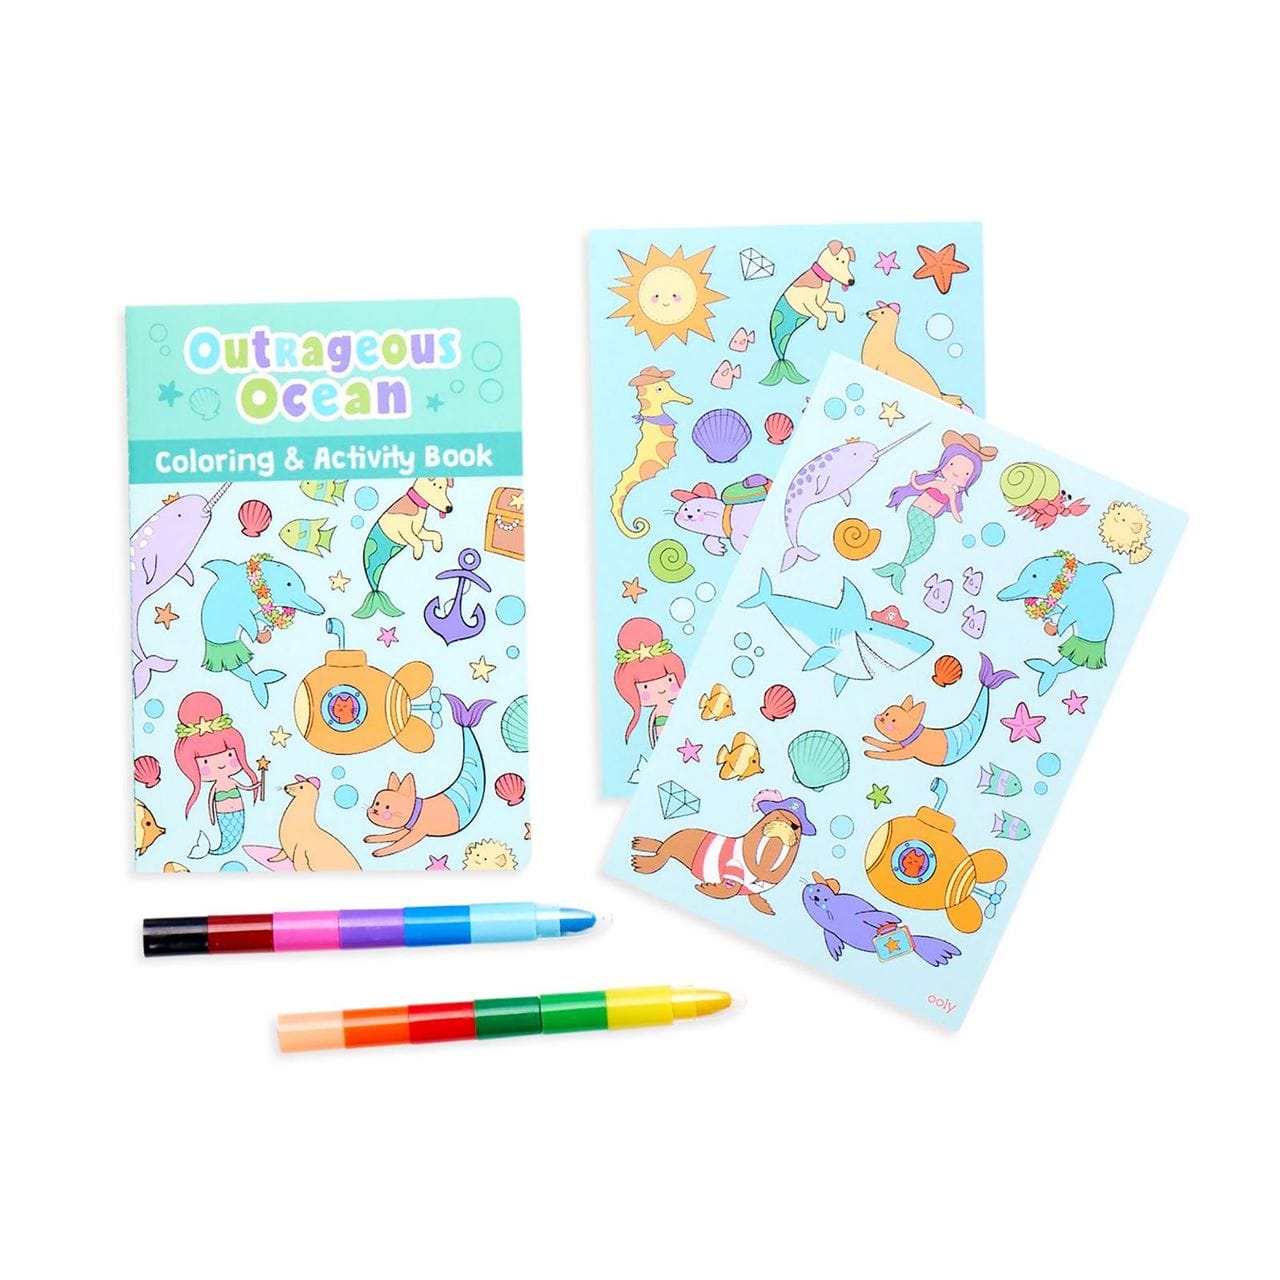 Ooly Toys Outrageous Ocean Mini Traveler Stationery Kit